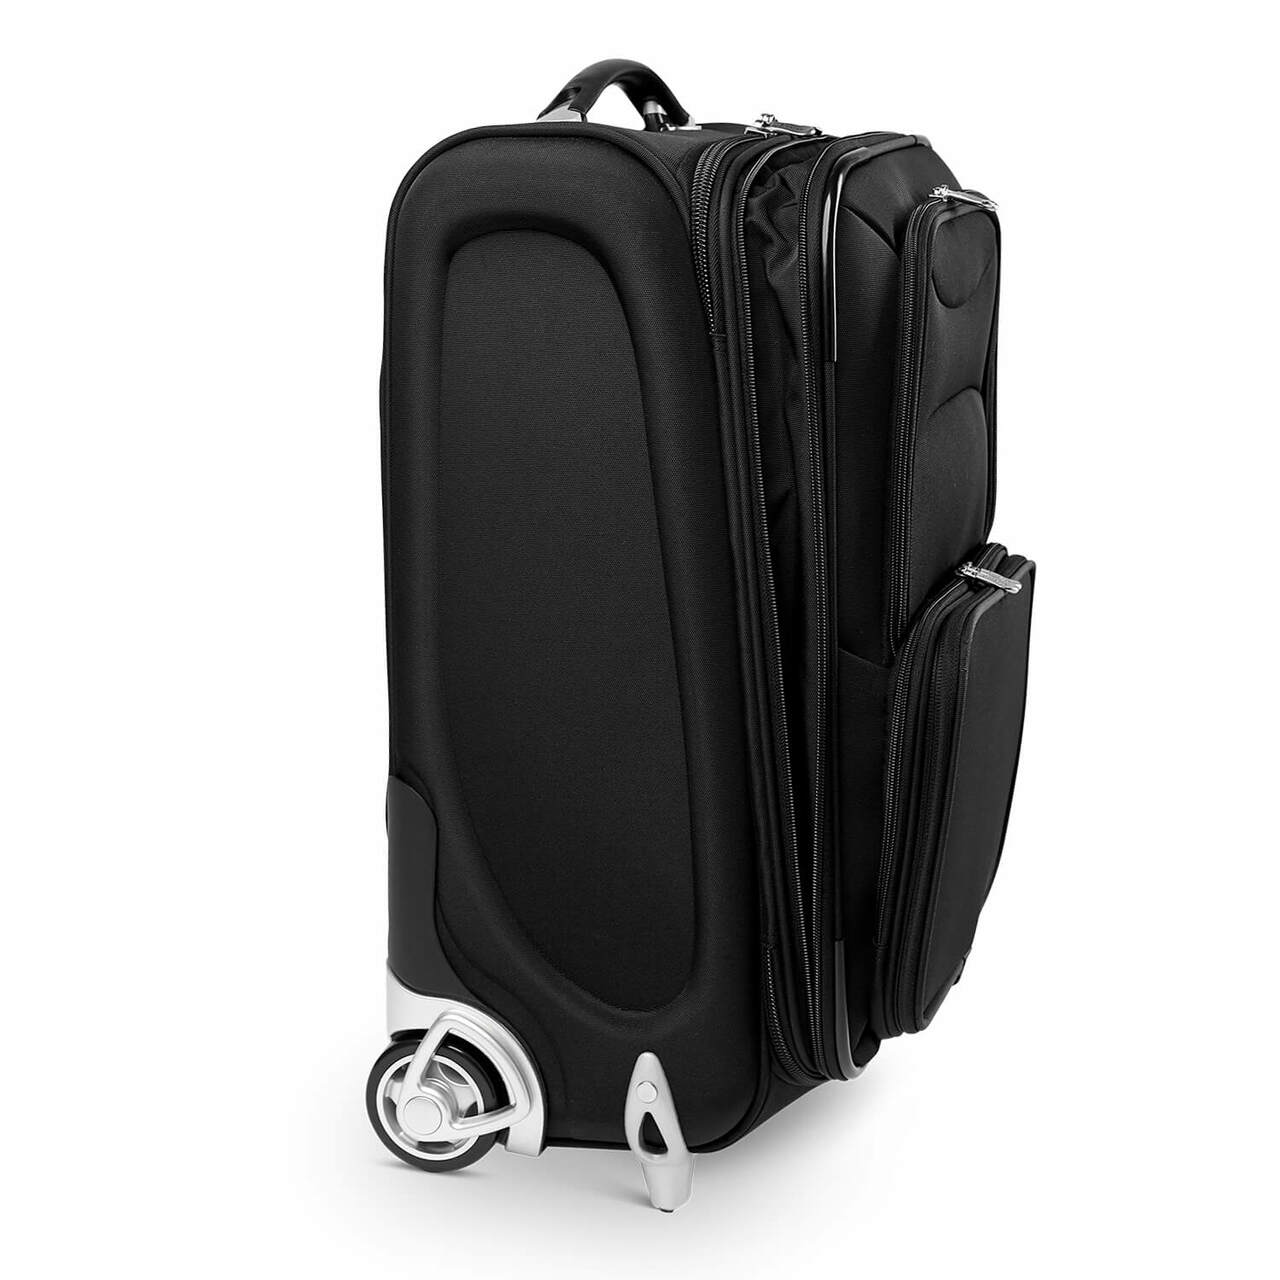 Pirates Carry On Luggage | Pittsburgh Pirates Rolling Carry On Luggage